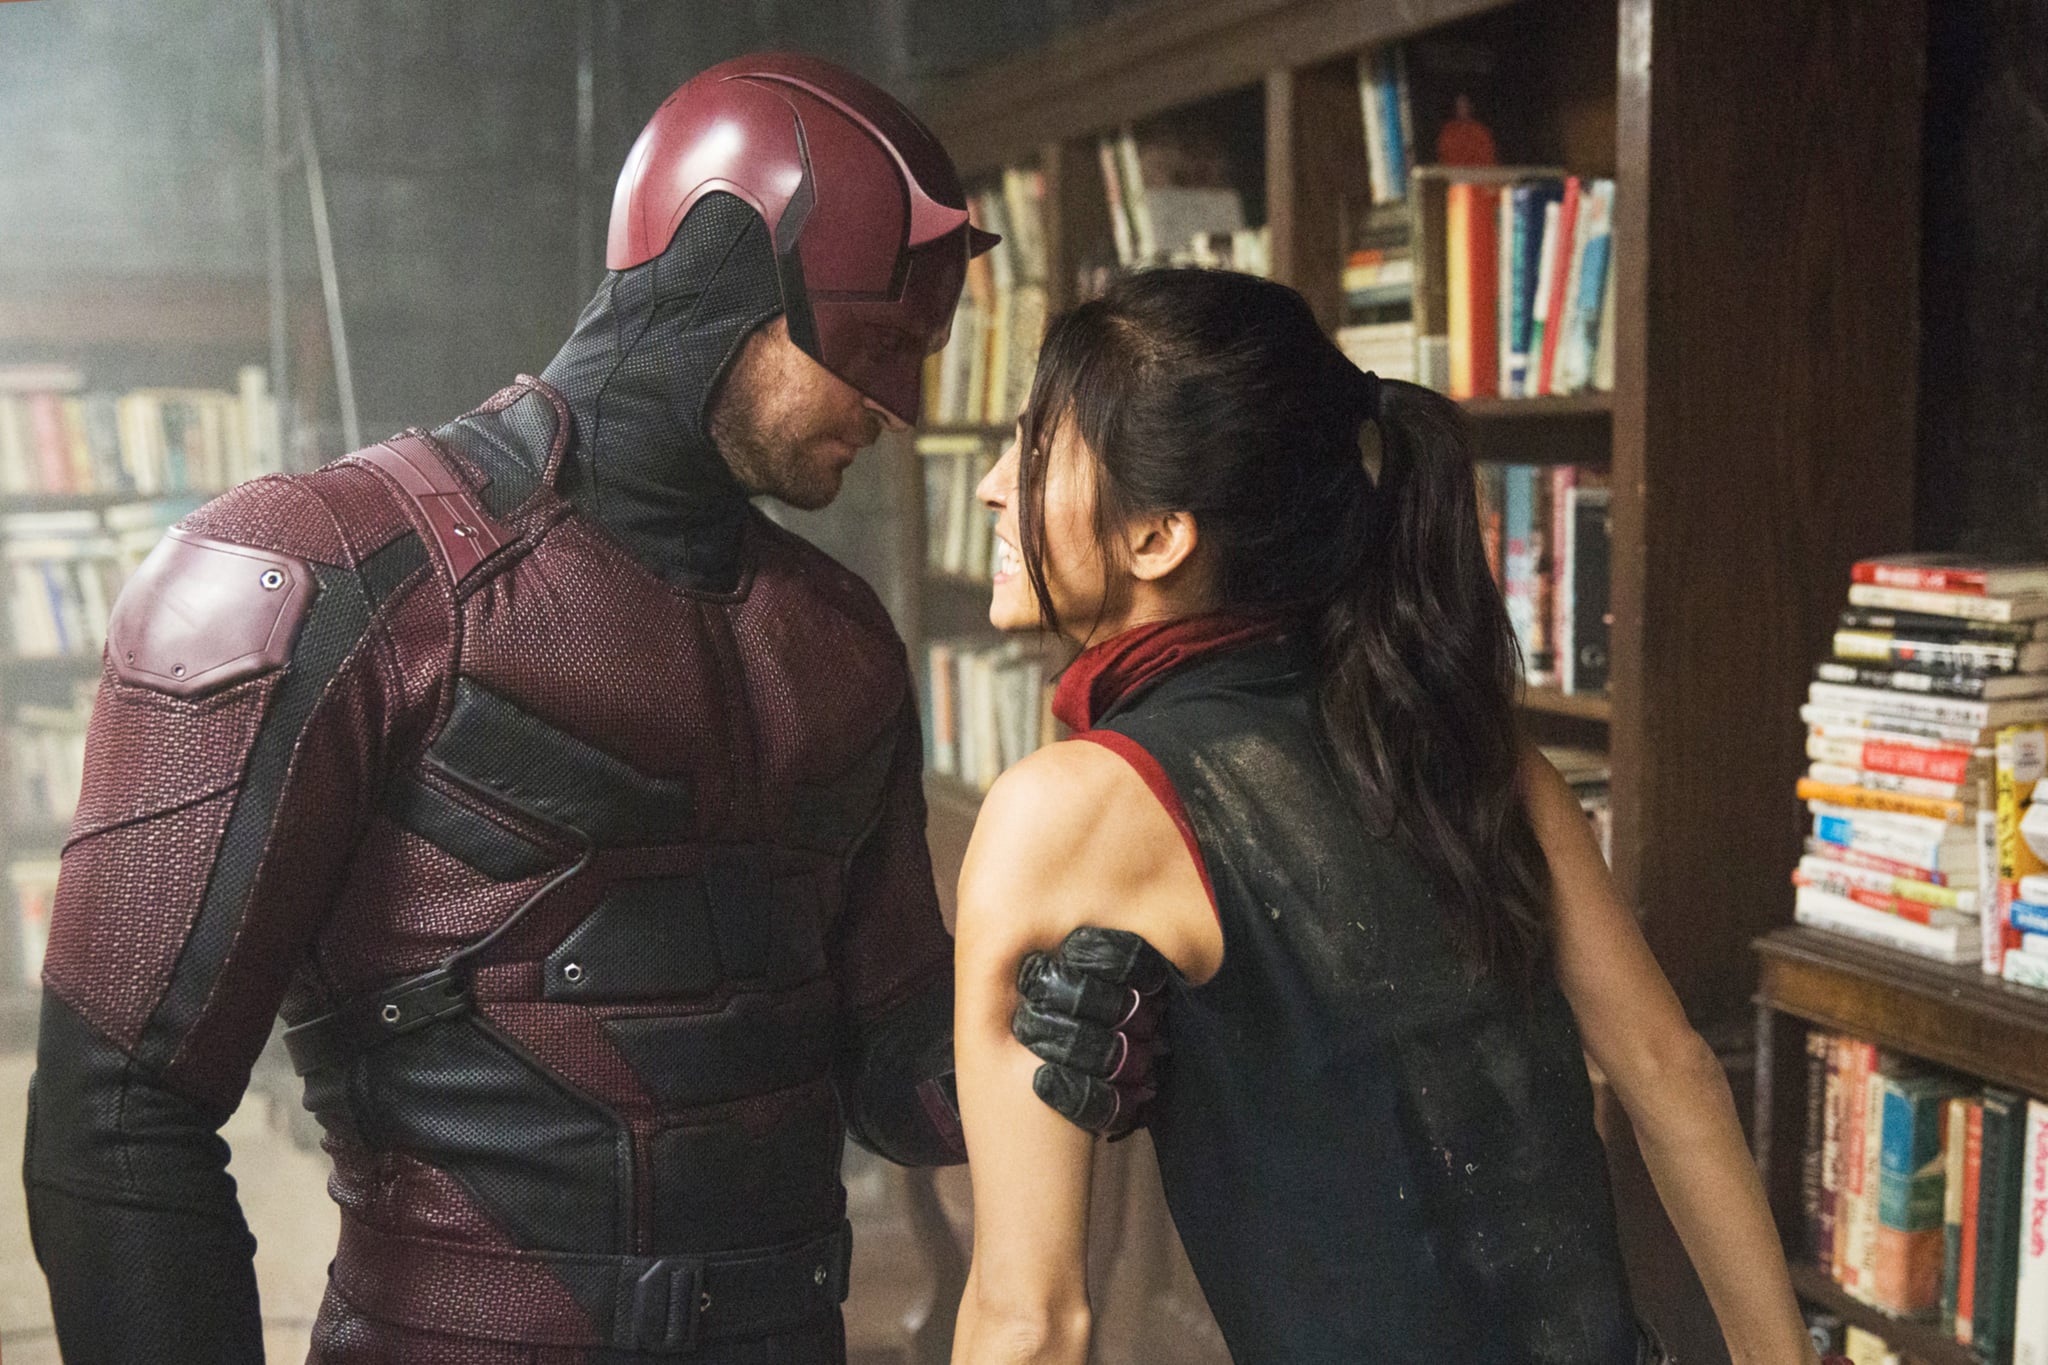 DAREDEVIL (aka MARVEL'S DAREDEVIL), from left: Charlie Cox; Elodie Yung, (Season 2, aired March 18, 2016). photo: Patrick Harbron / Netflix / Courtesy: Everett Collection